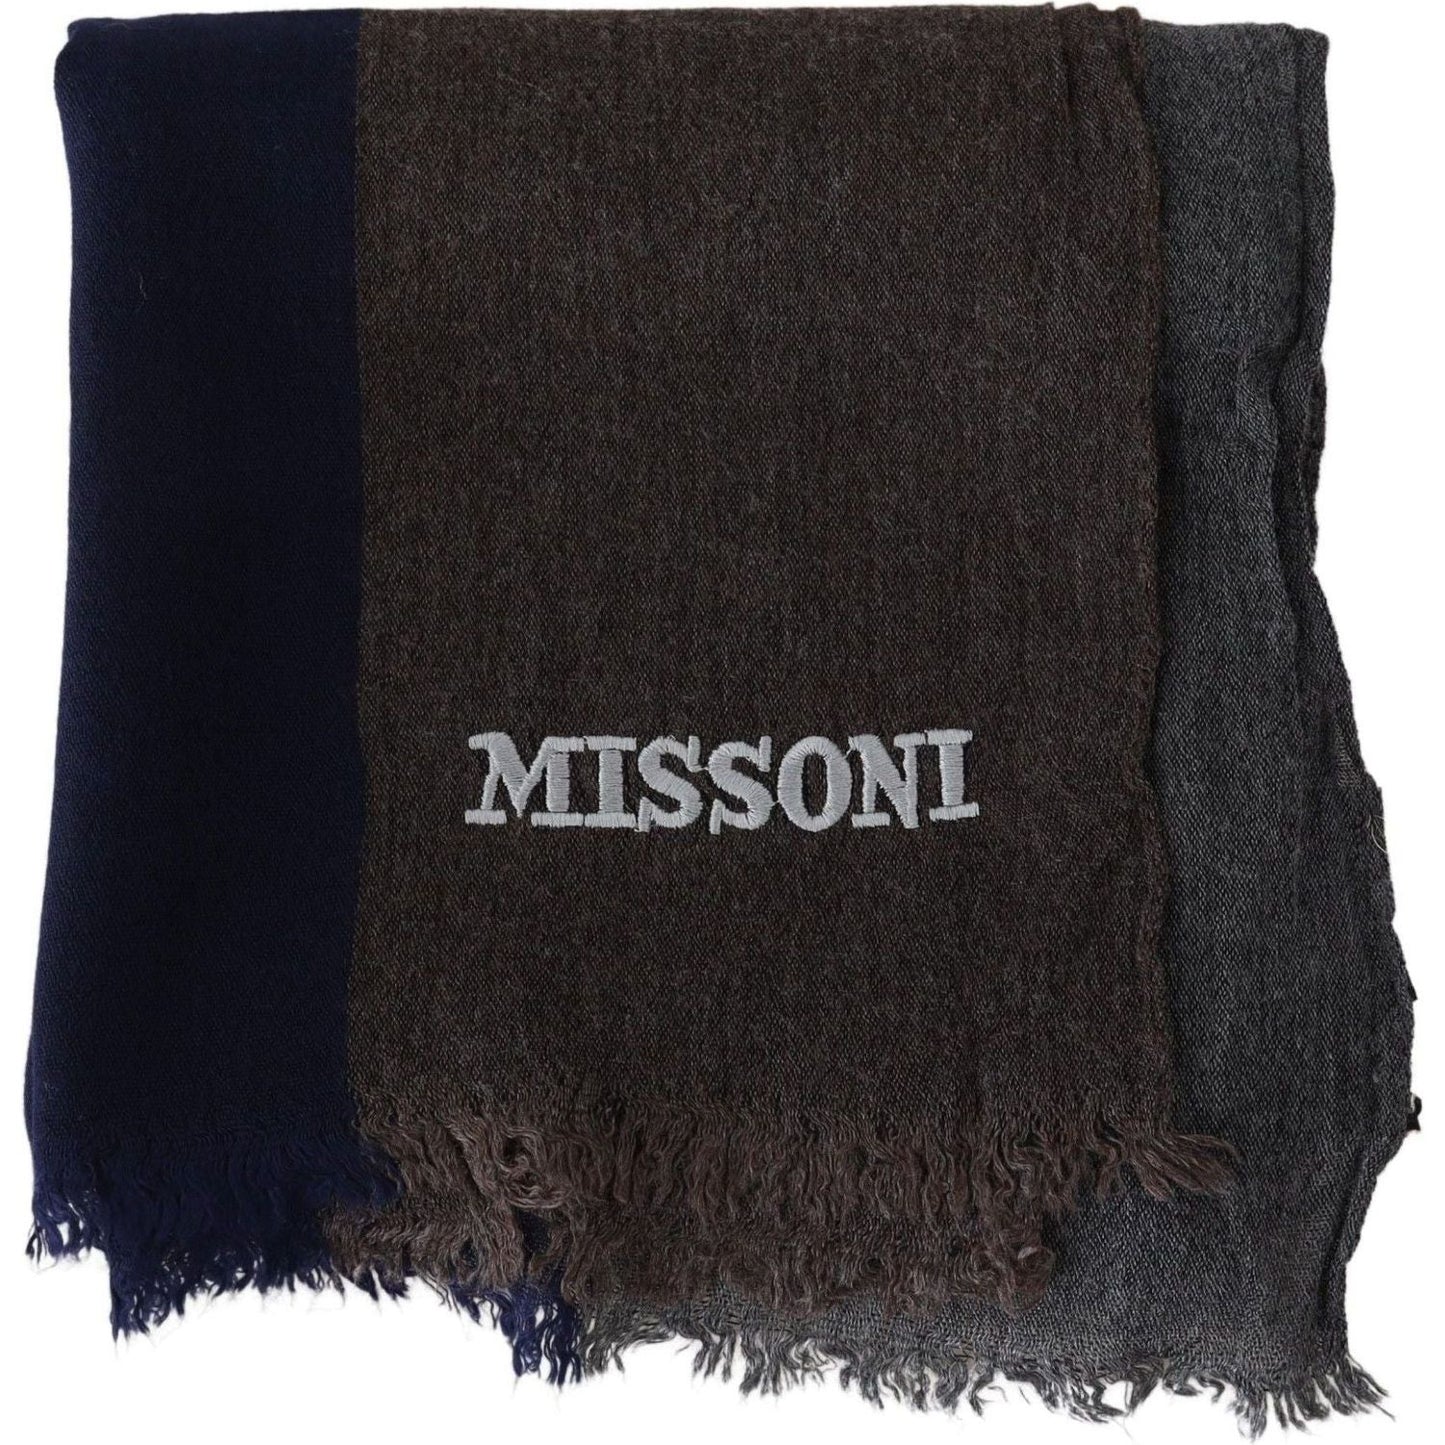 Elegant Multicolor Wool Scarf with Signature Embroidery